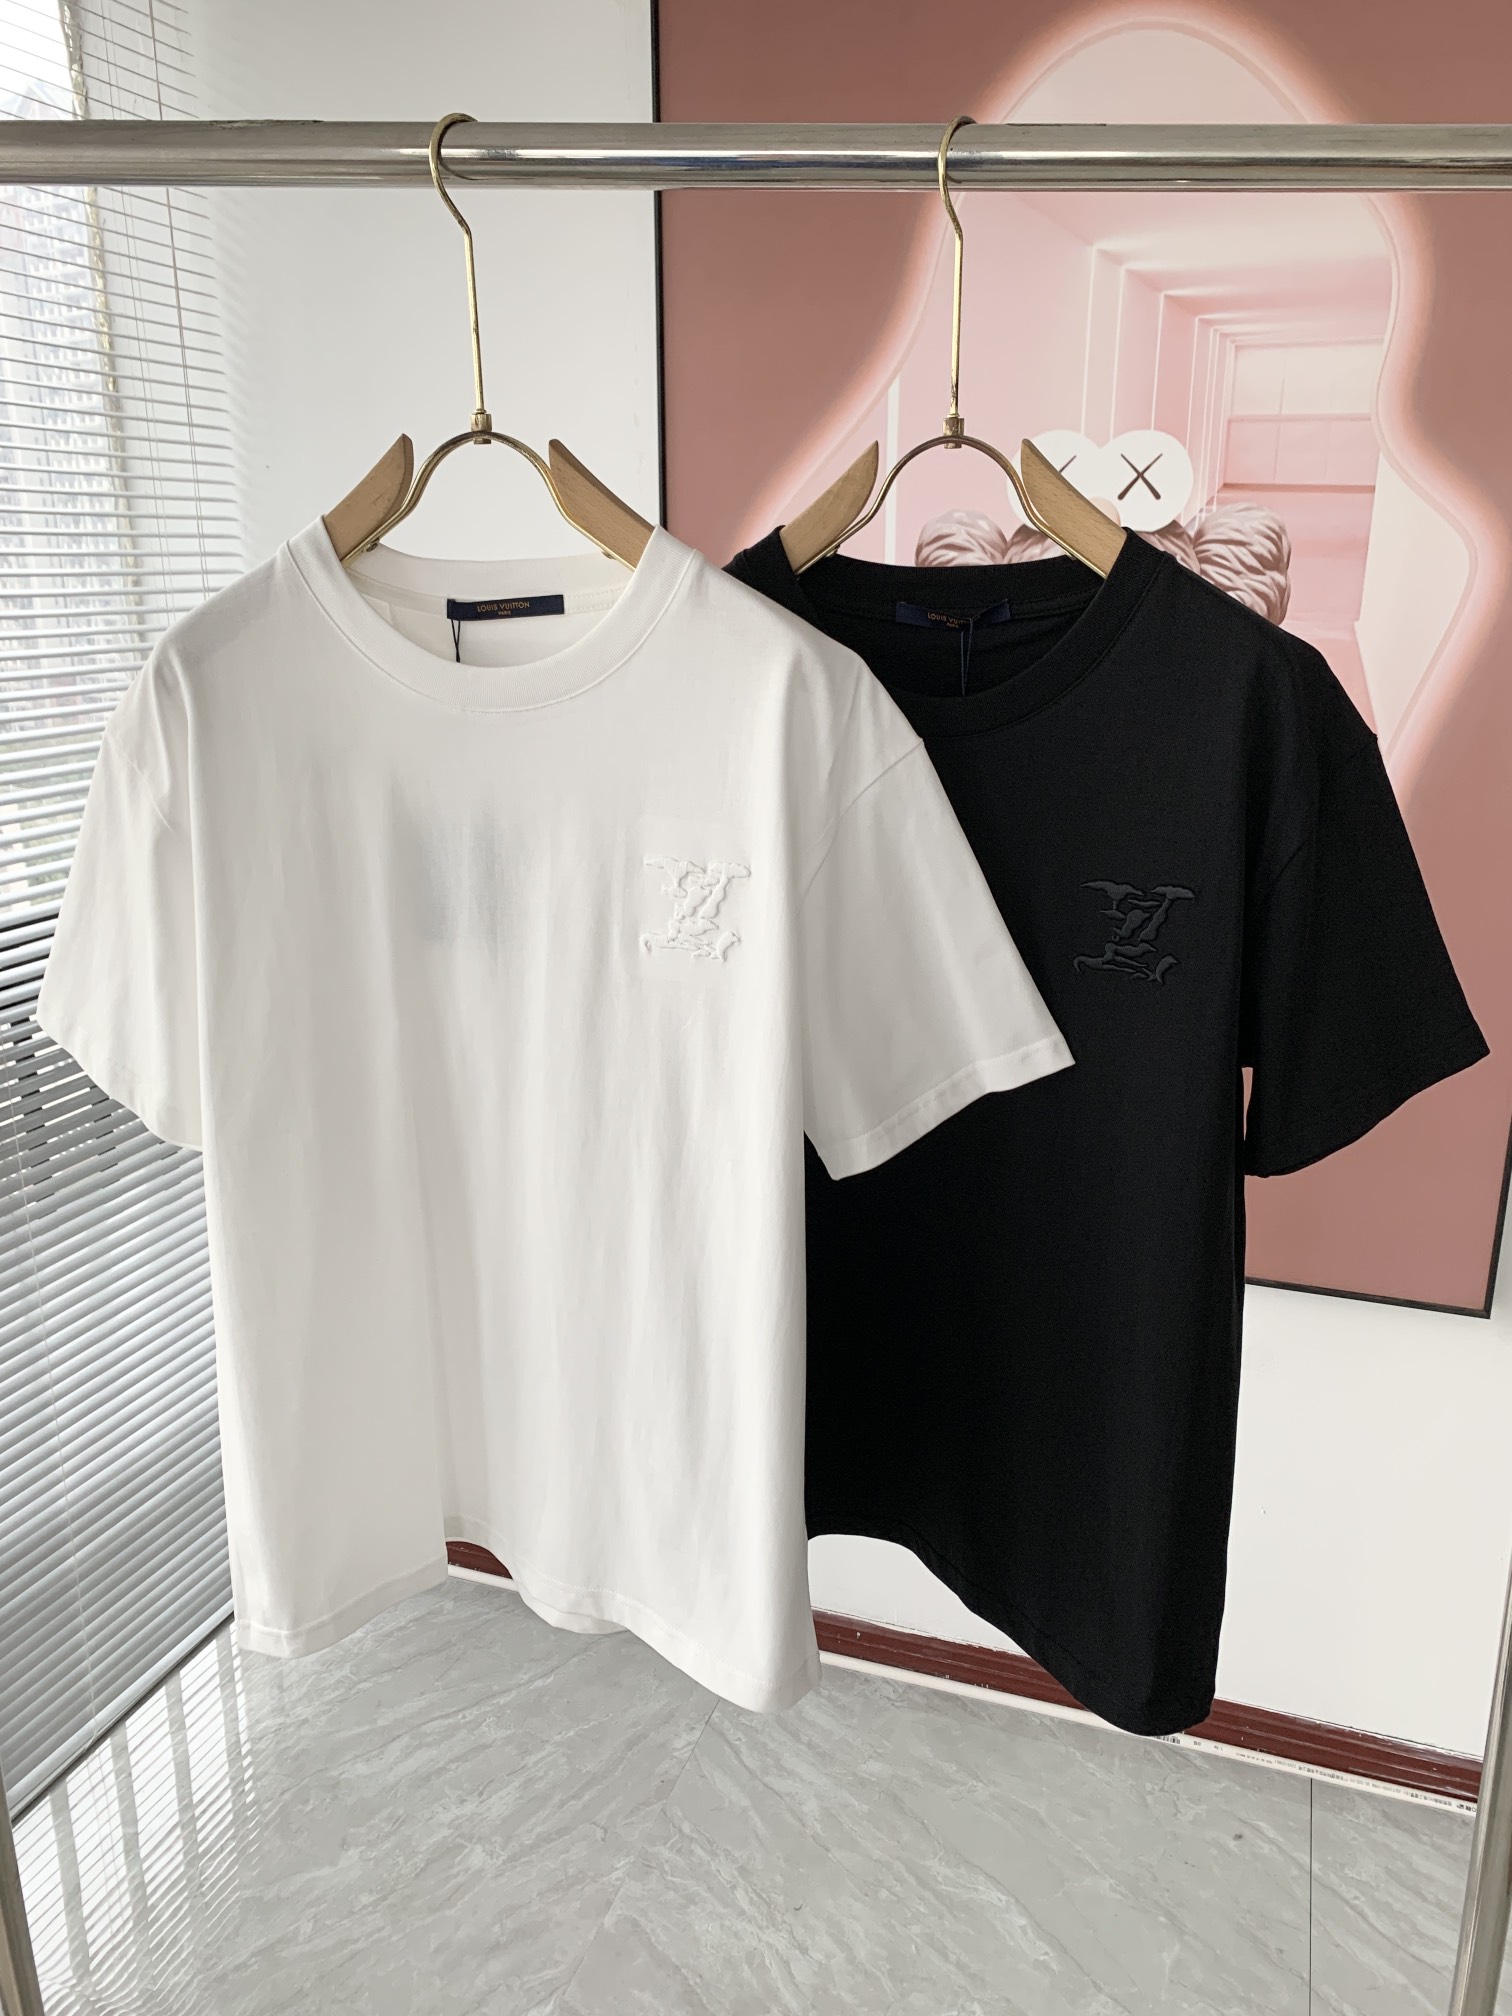 Louis Vuitton Clothing T-Shirt Embroidery Unisex Cotton Spring/Summer Collection Short Sleeve